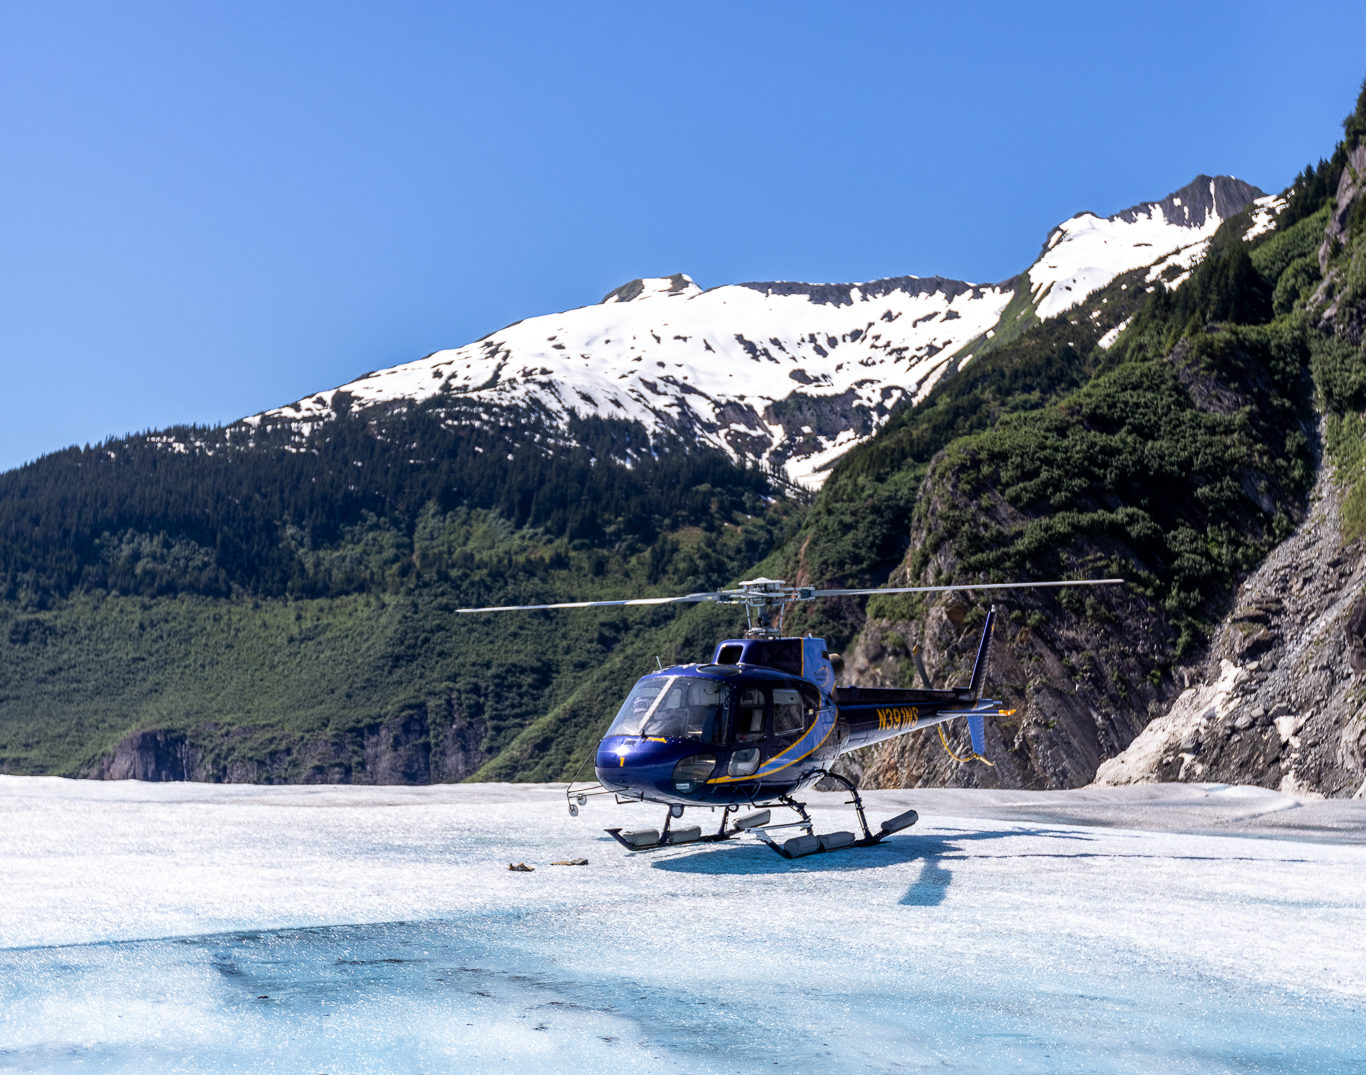 A blue NorthStar Helicopter on a glacier with a snow capped mountain in the background